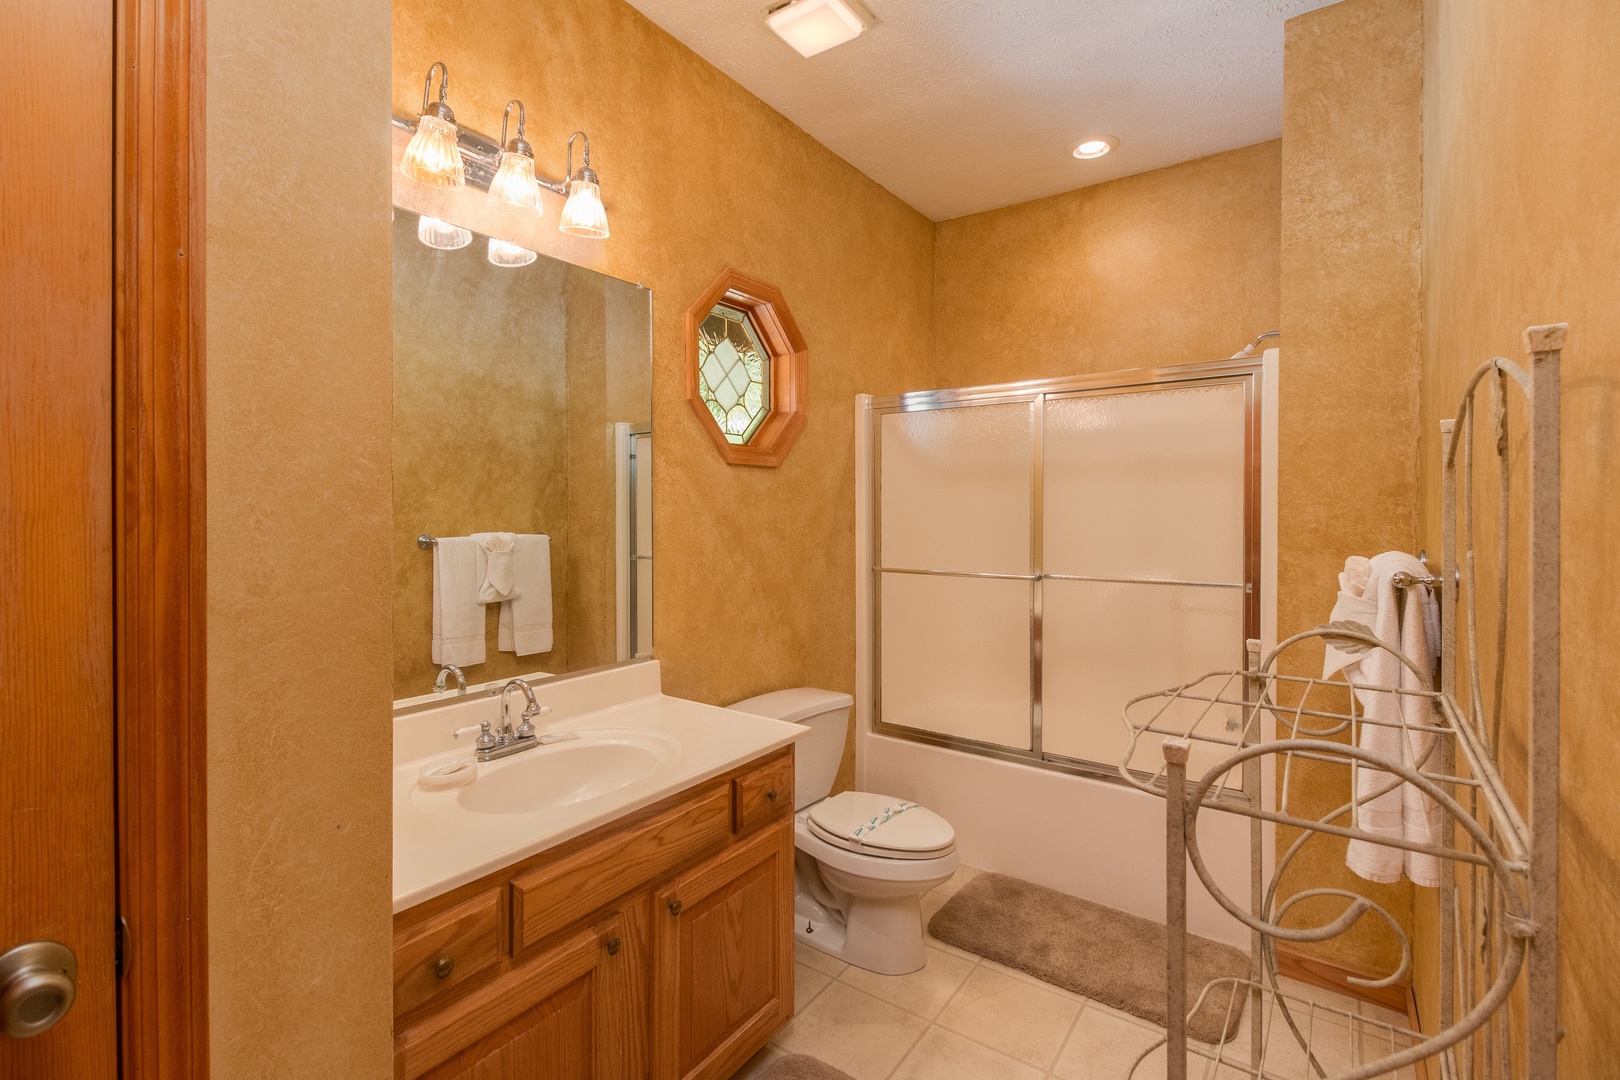 Bathroom with a tub and shower at Stones Throw, a 4 bedroom cabin rental located in Pigeon Forge